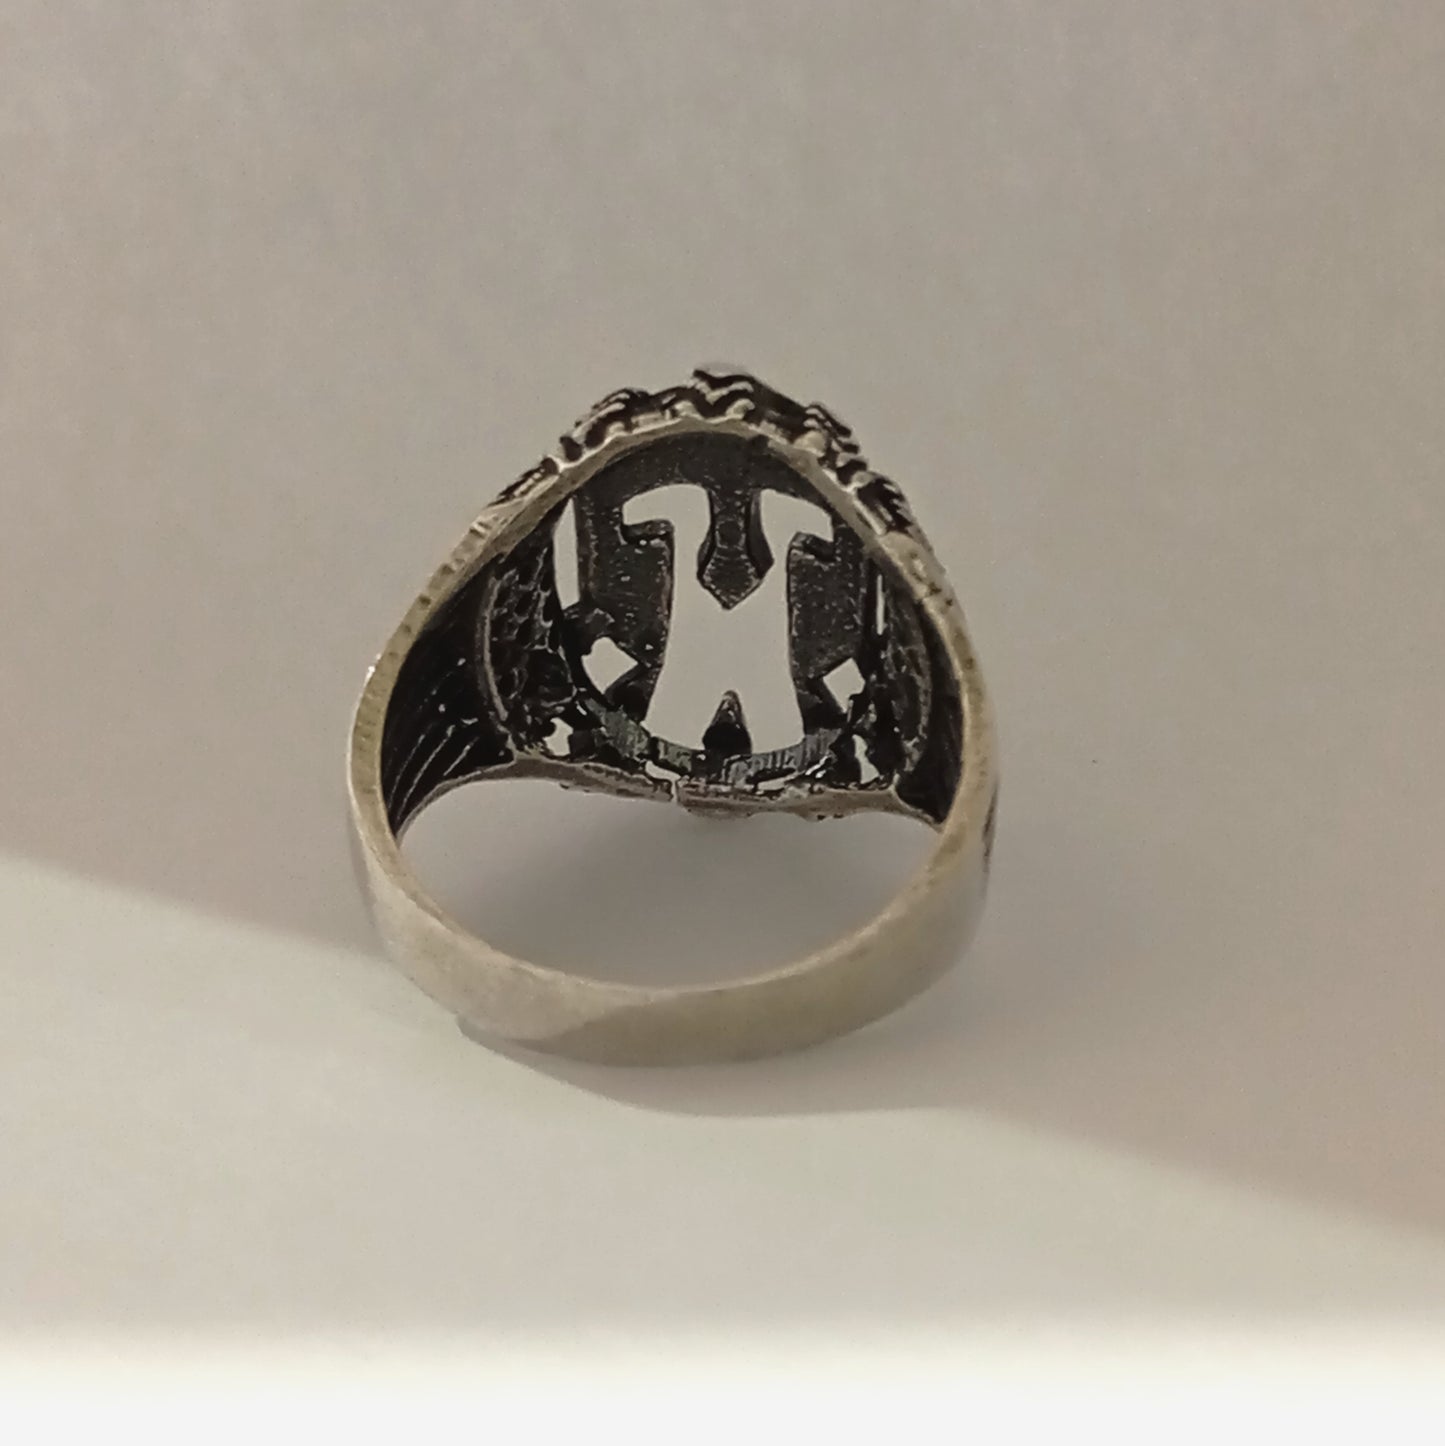 Spartan Helmet - King Leonidas - 300 Spartans - Battle of Thermopylae - 480 BC - Ring - Size EU 65 - Size US 11 - 925 Sterling Silver